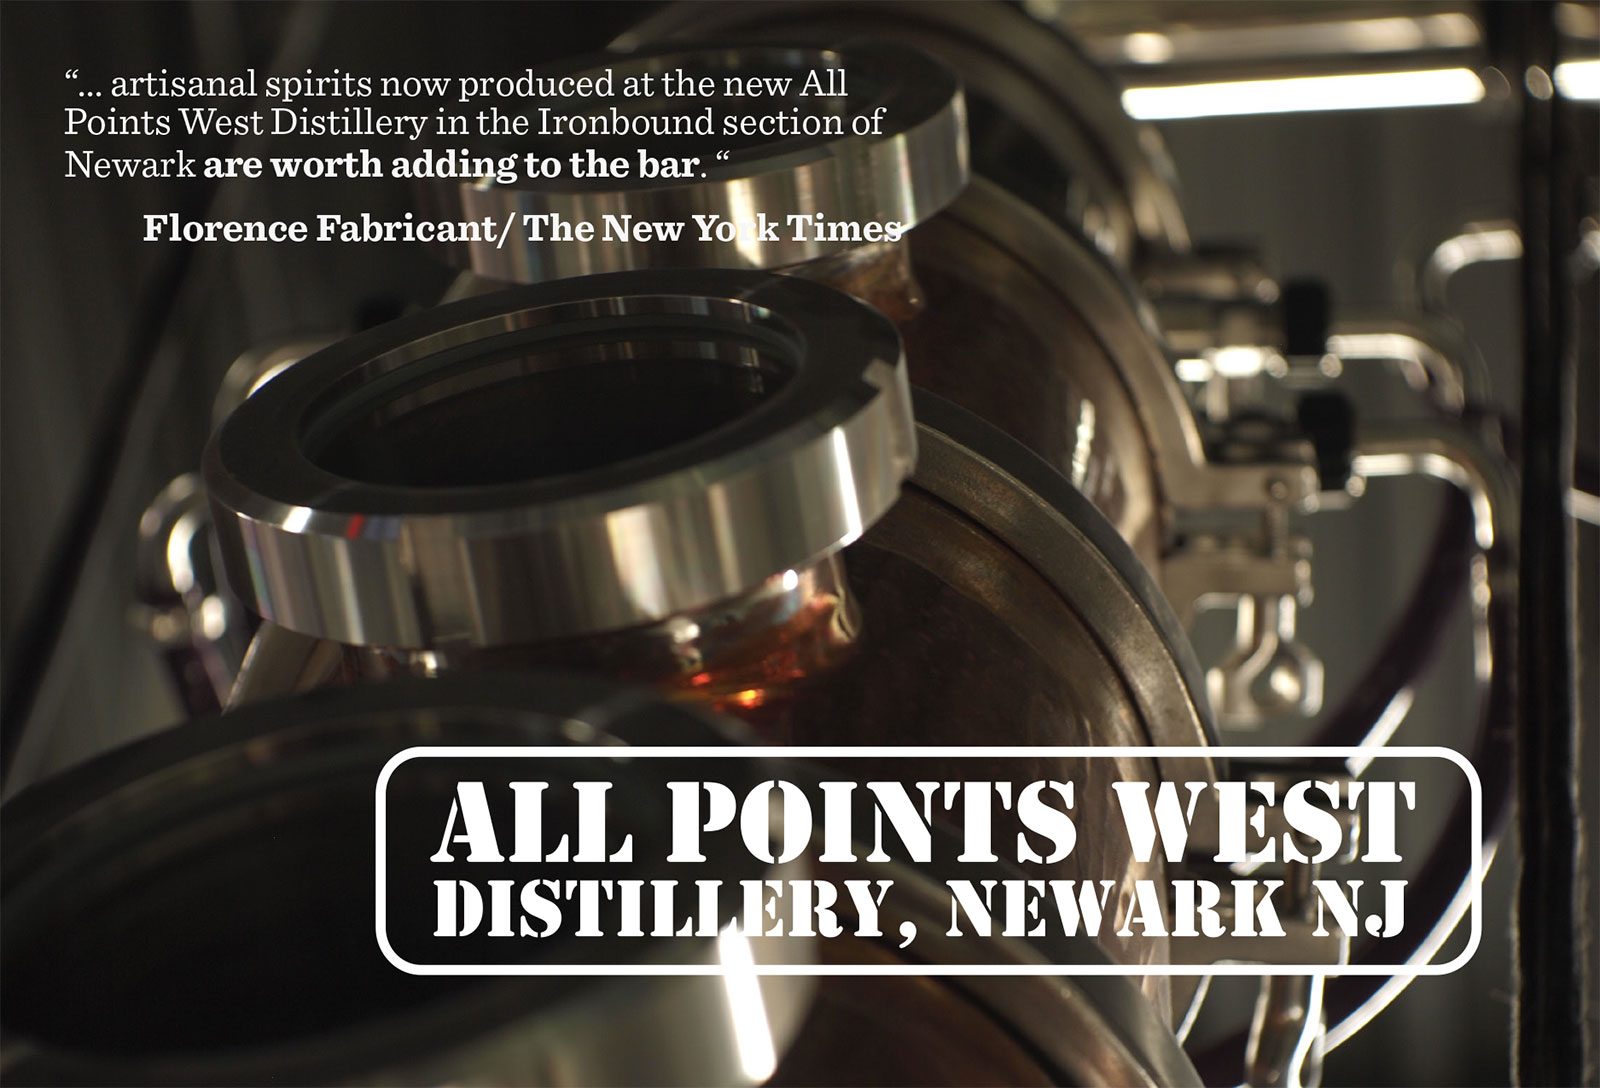 All Points West Distillery - New York Times